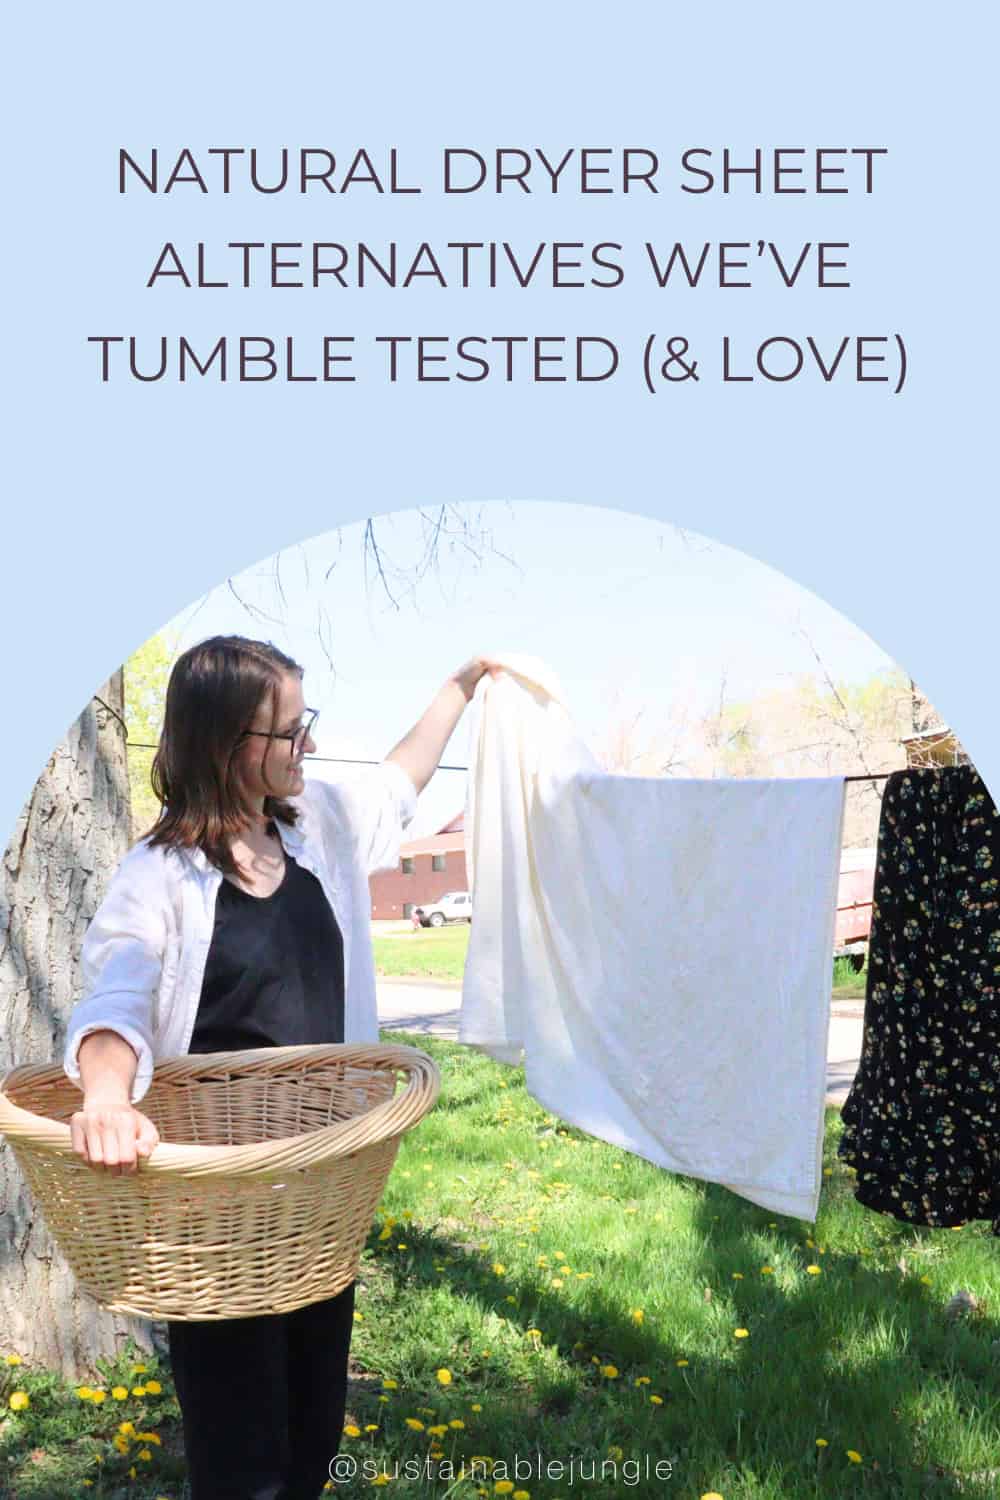 Natural Dryer Sheet Alternatives We've Tumble Tested (& Love) Image by Sustainable Jungle #dryersheetalternatives #alternativestodryersheets #substitutefordryersheets #whattouseinsteadofdryersheets #dryersheetreplacement #sustainablejungle